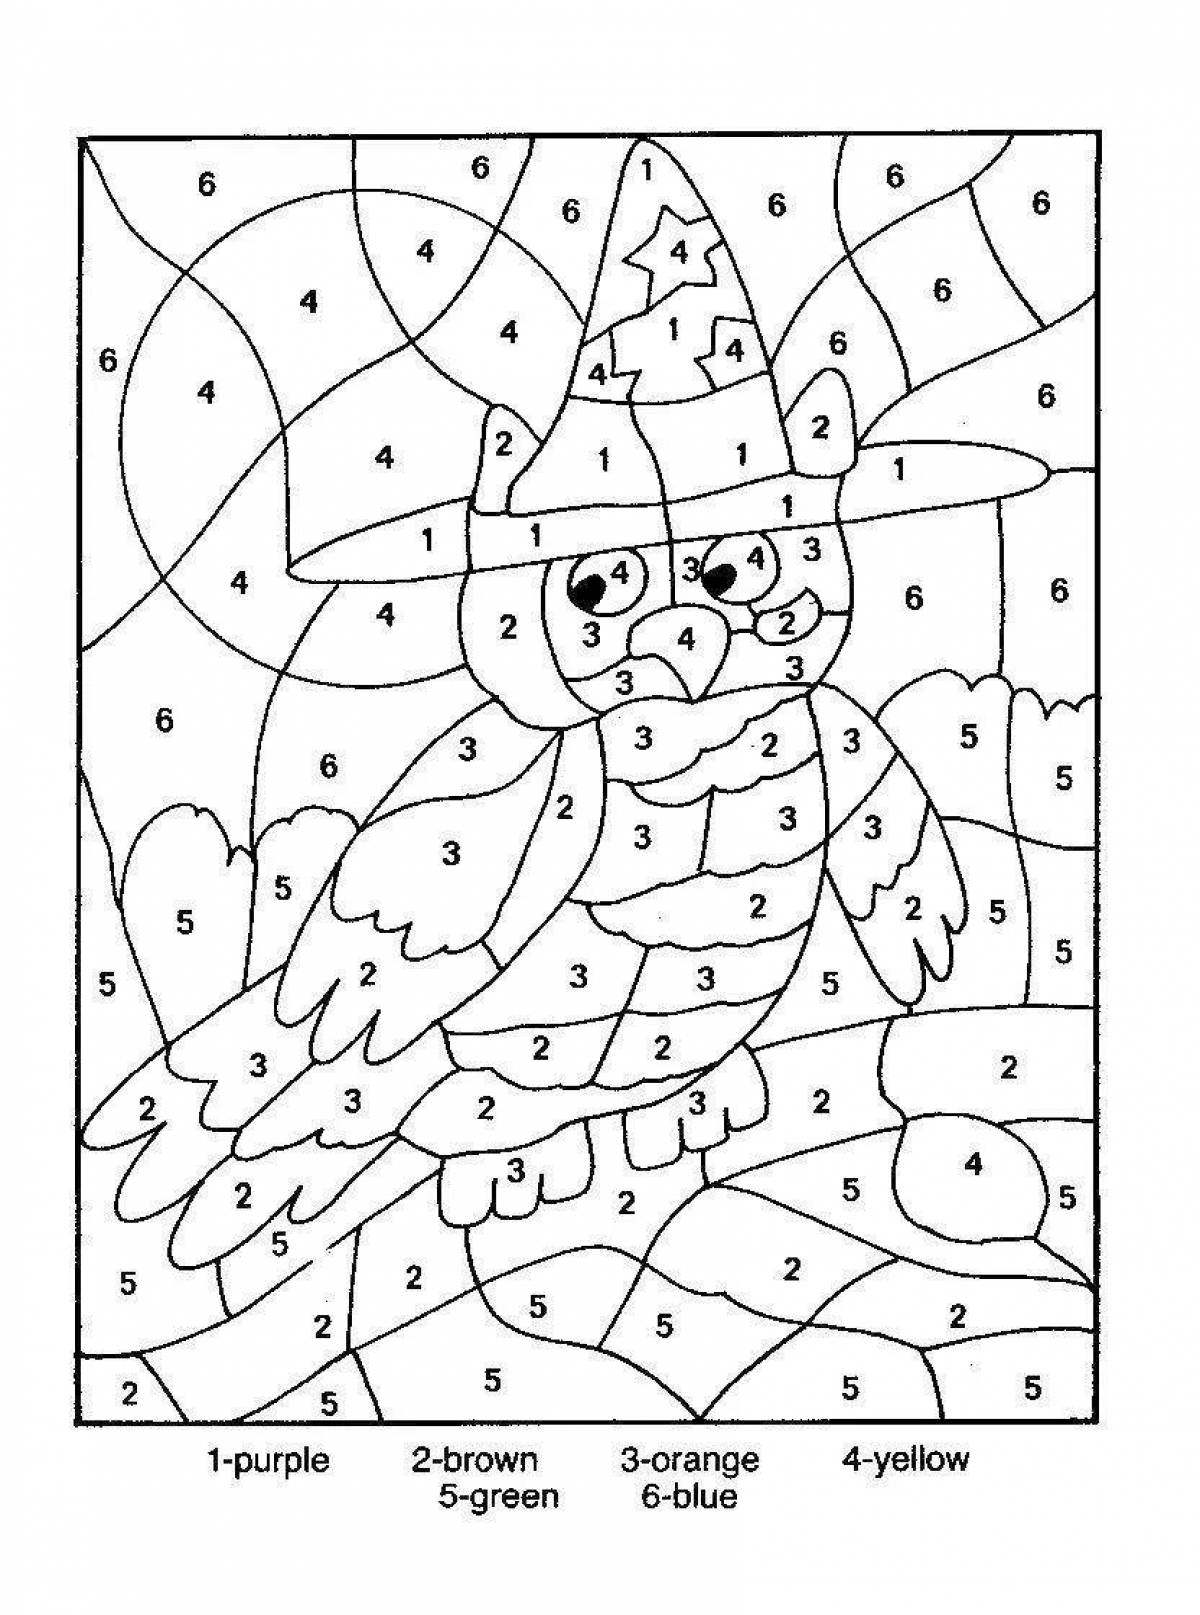 Crazy coloring book color by number